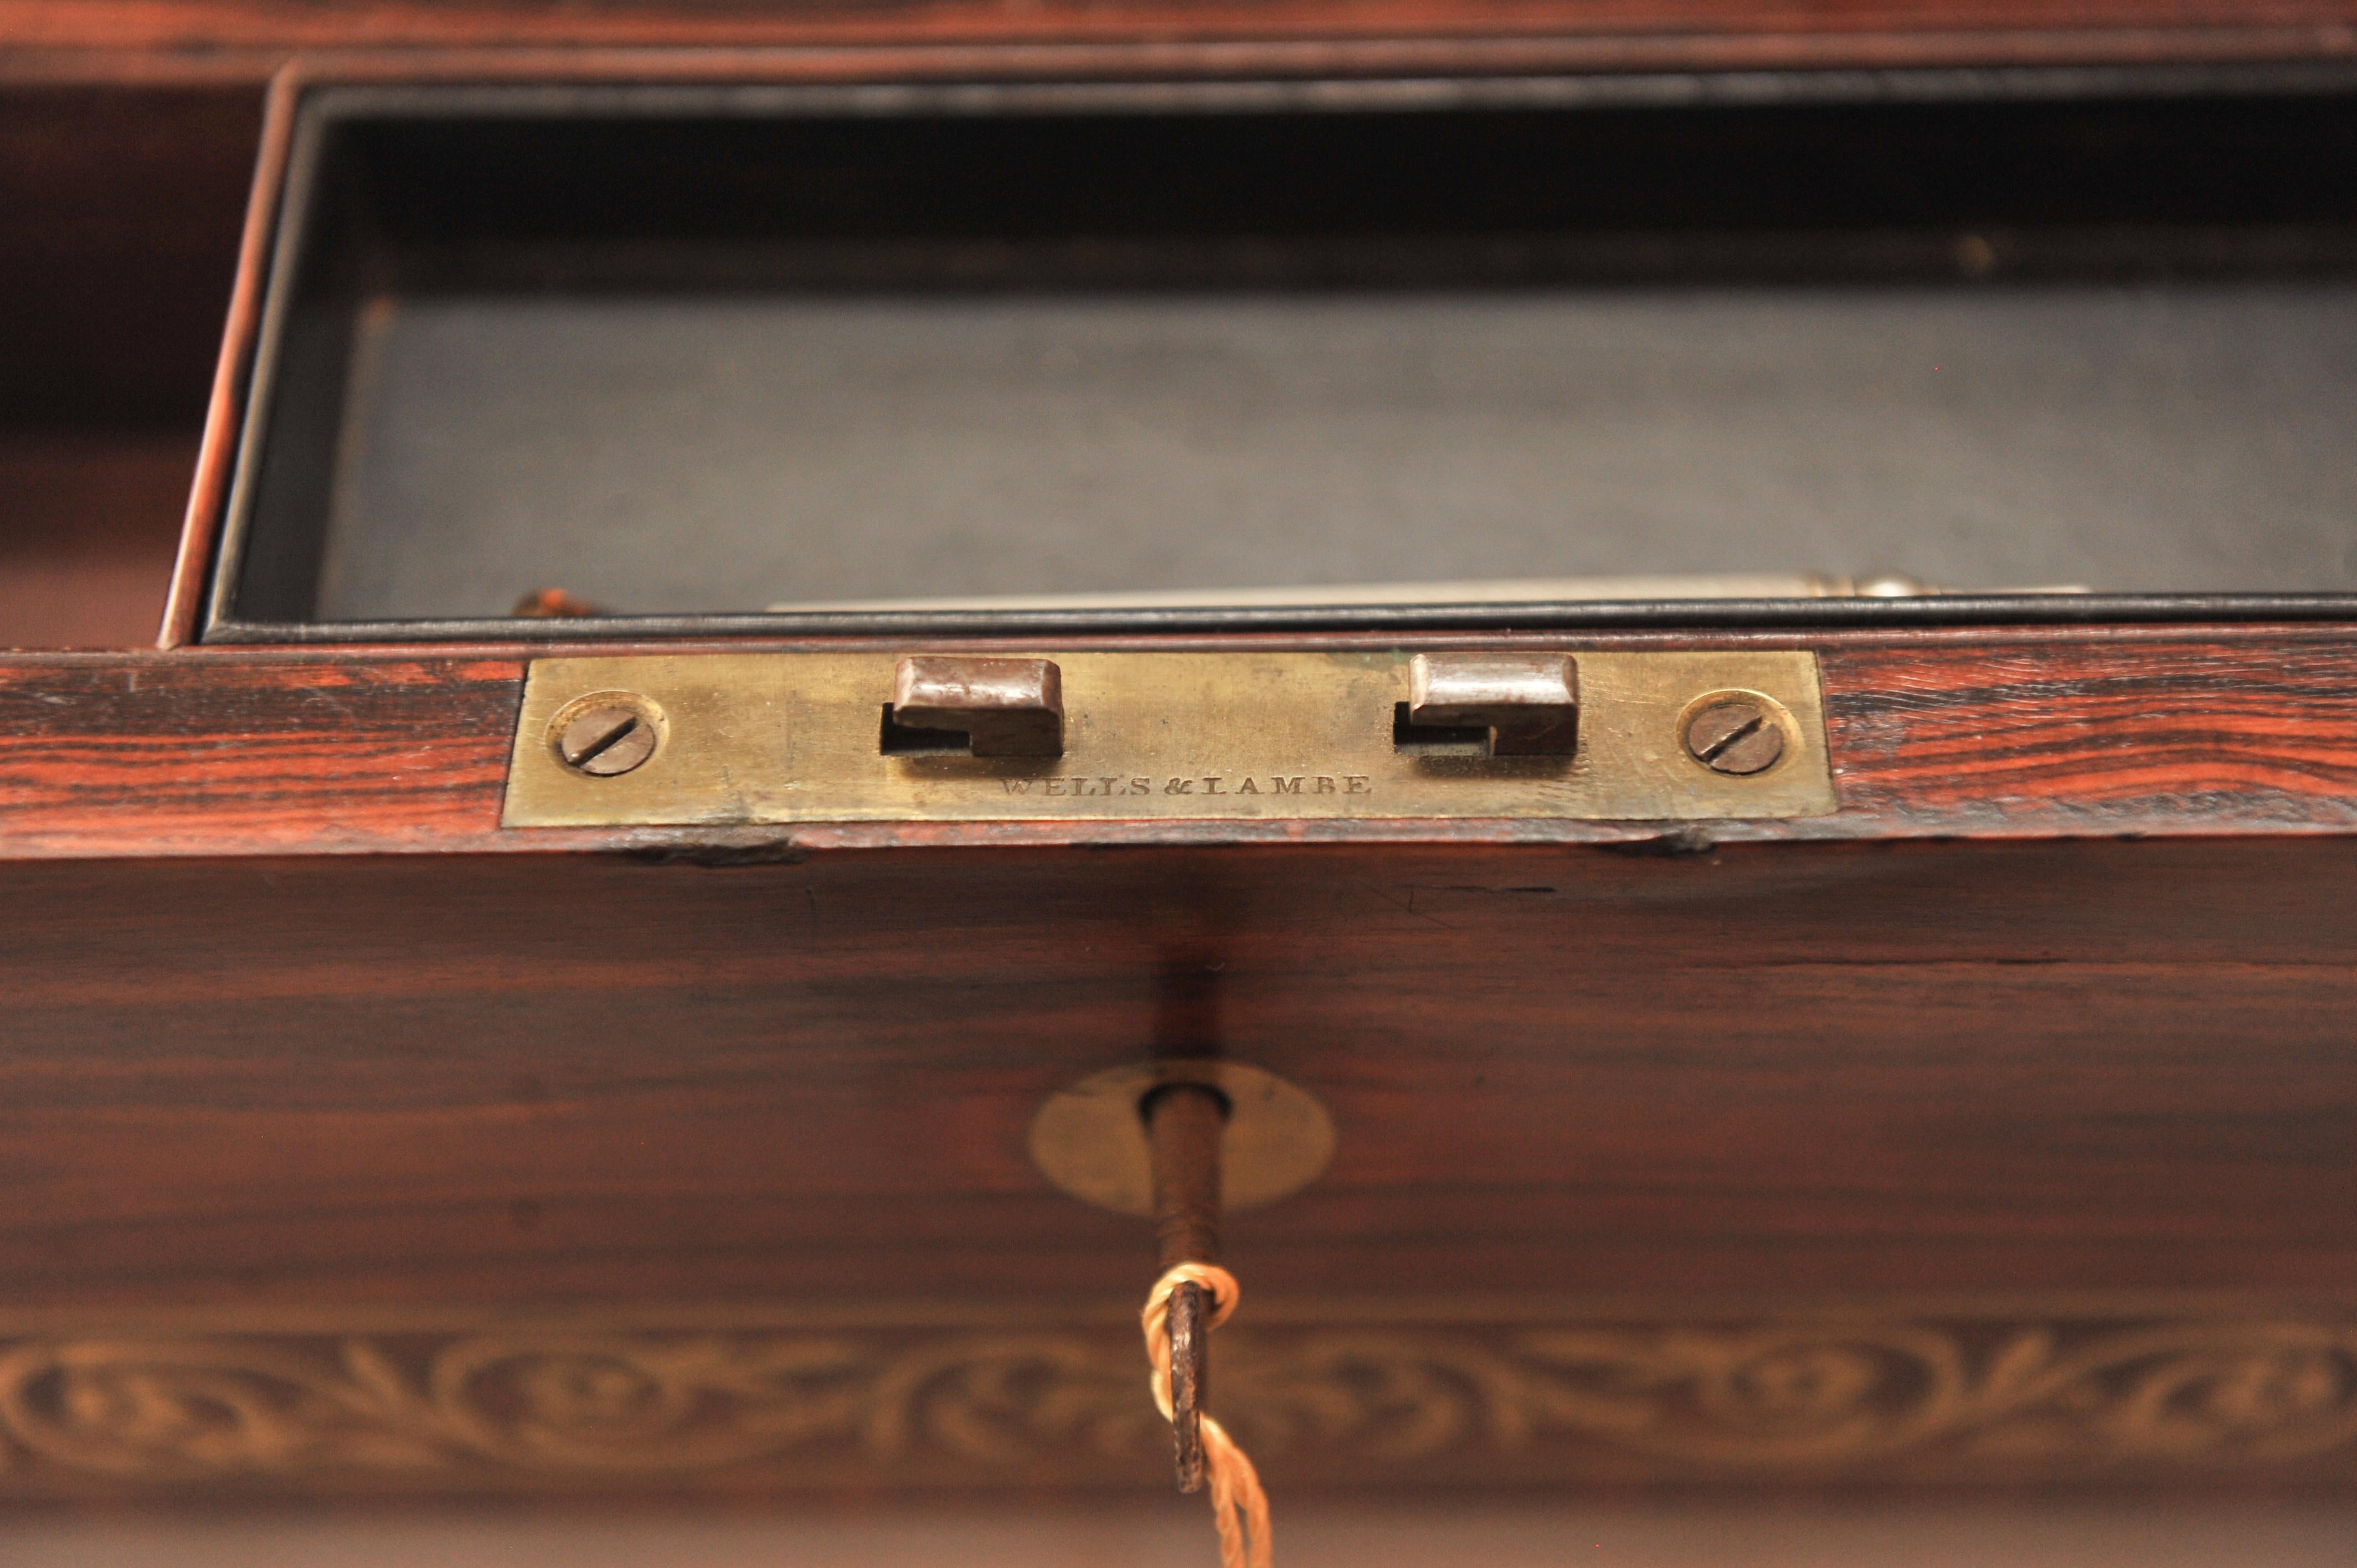 19th Century Rare Regency Rosewood Writing Slope With Decorative Brass Trim by Wells & Lambe For Sale